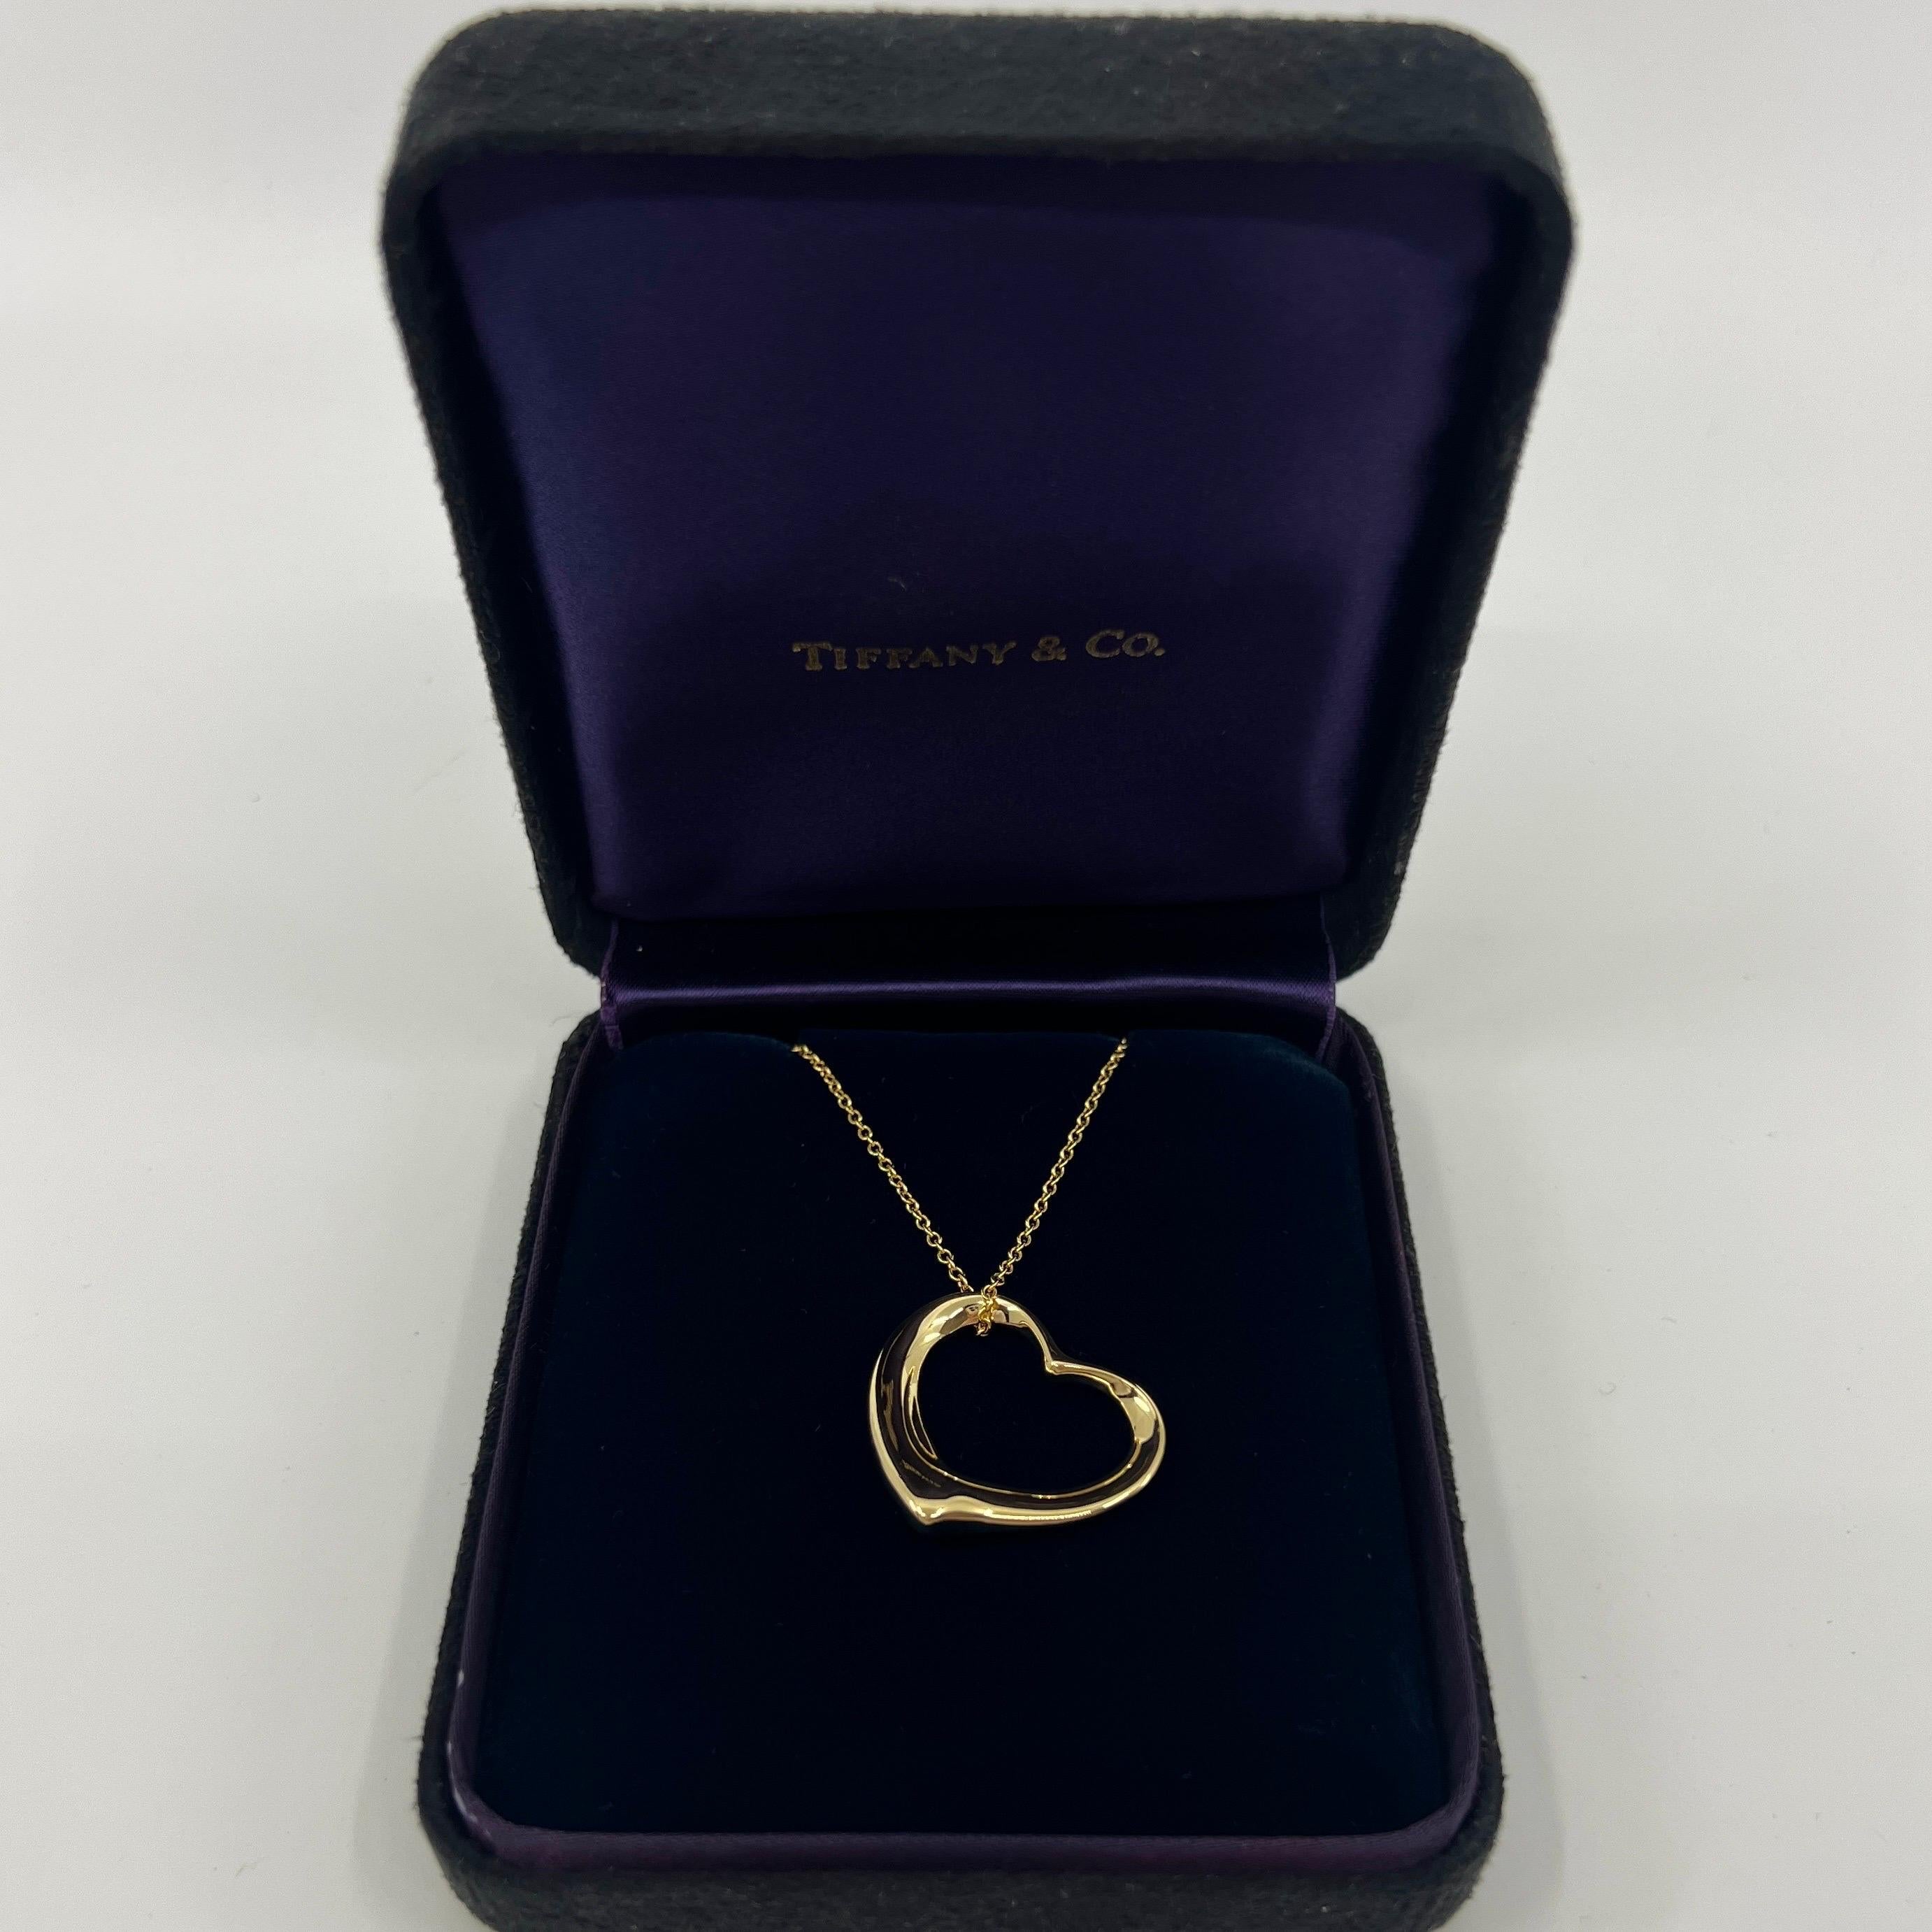 Vintage Tiffany & Co. Elsa Peretti Large Open Heart 18k Yellow Gold Pendant Necklace.

A beautiful and rare authentic Tiffany & Co extra large open heart pendant from the stylish and popular Elsa Peretti range. Extra large size pendant.

A rare